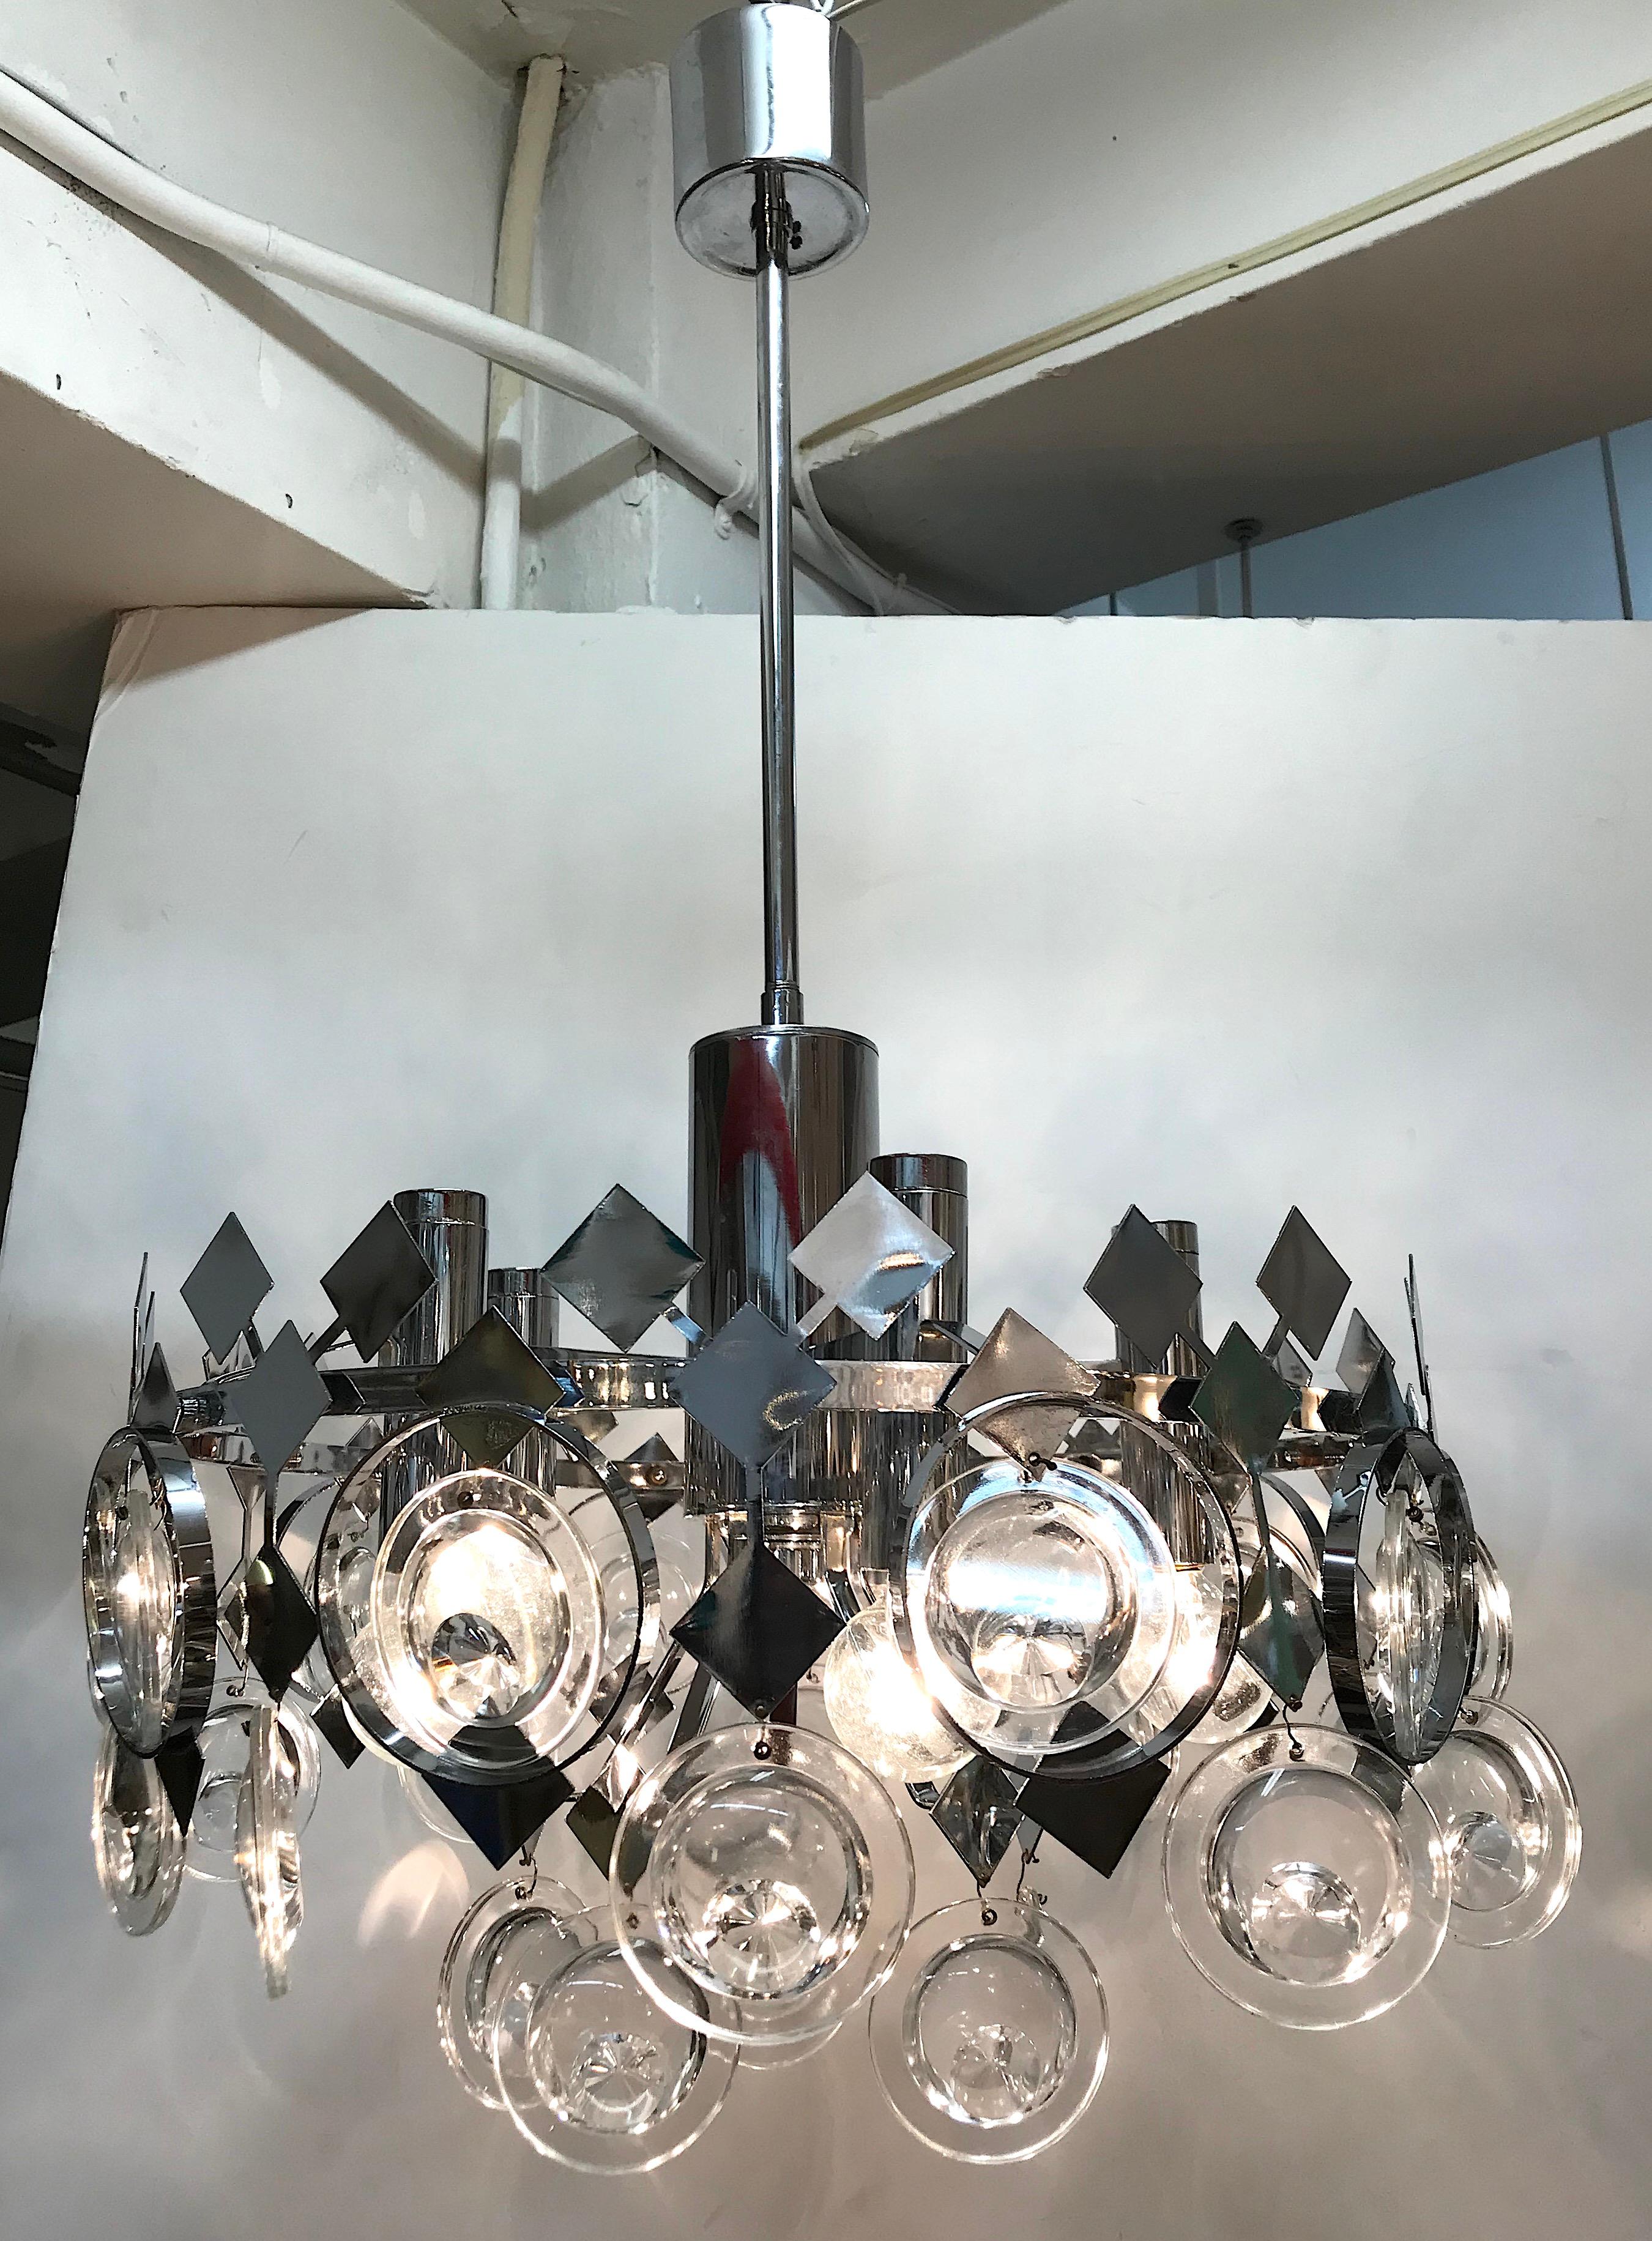 A fabulous and unique 1970s Italian chrome chandelier with optical glass lens disks. Light and airy in design, the body of the chandelier is very open. It consists of diamond pieces mounted onto a circular frame interspersed with glass disks. Each